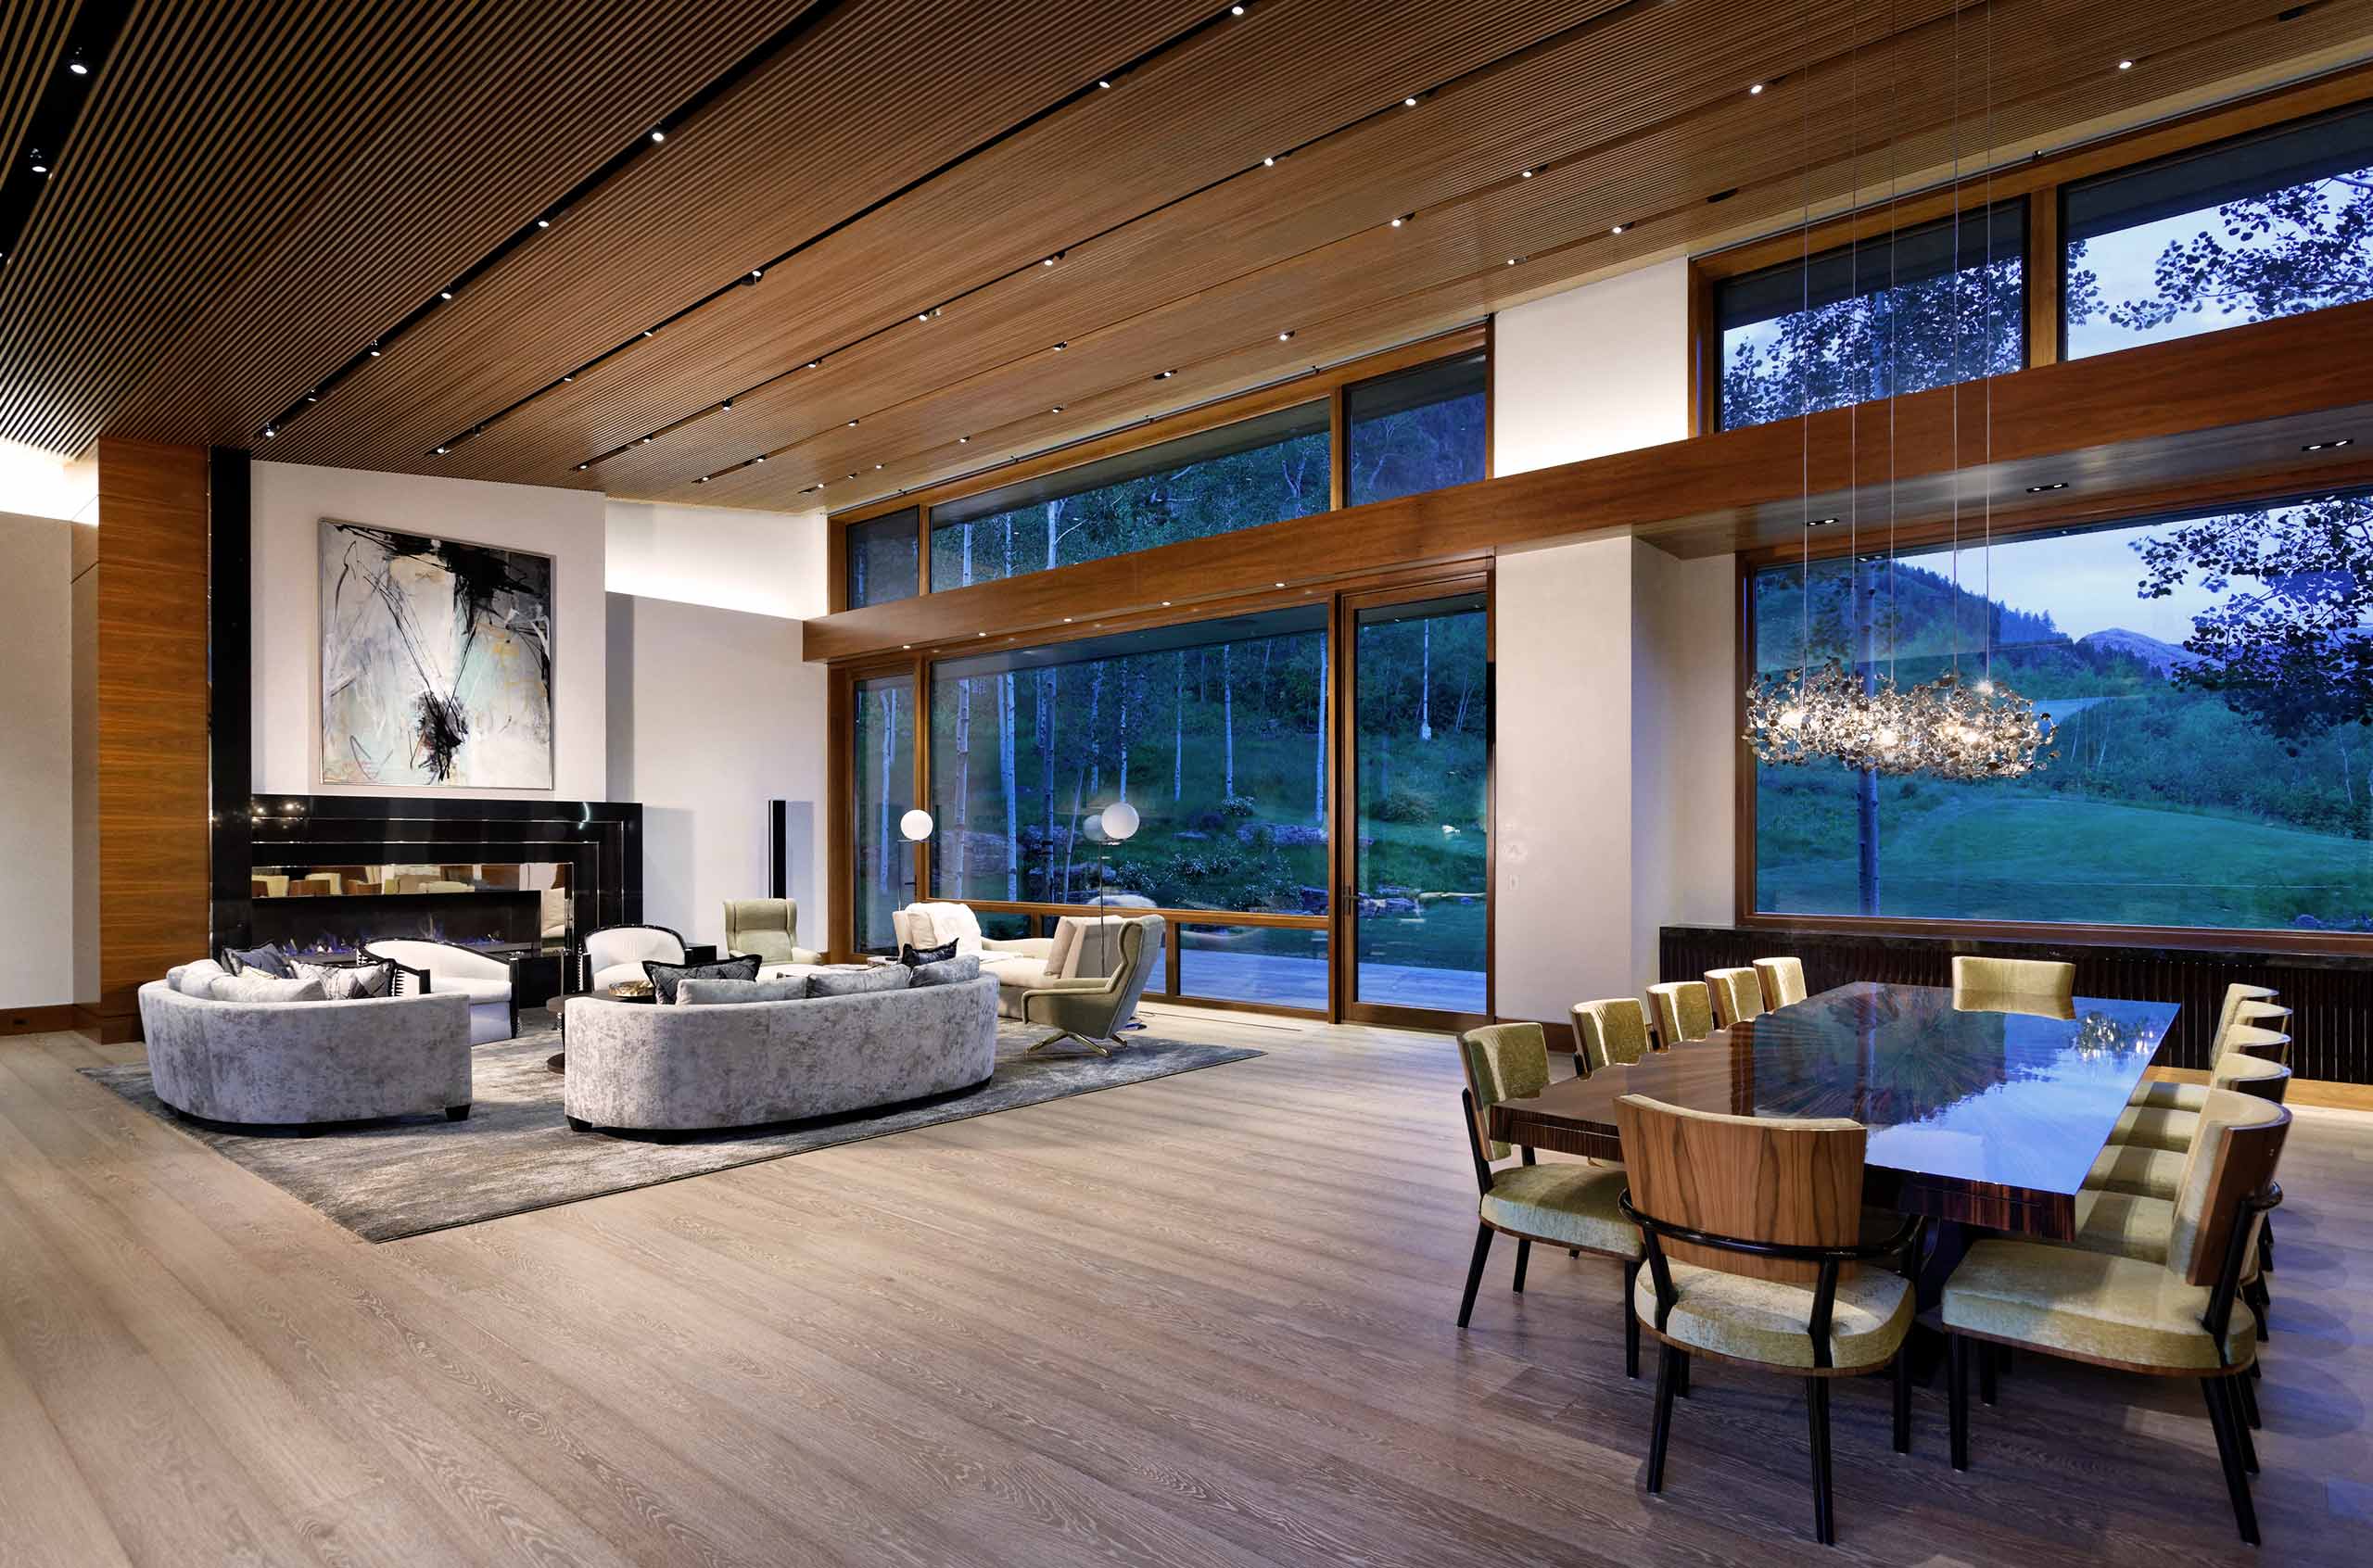 Spacious living area of an Aspen Cuvée luxury villa with oversized glass windows, sweeping mountain views and custom luxury interior design.